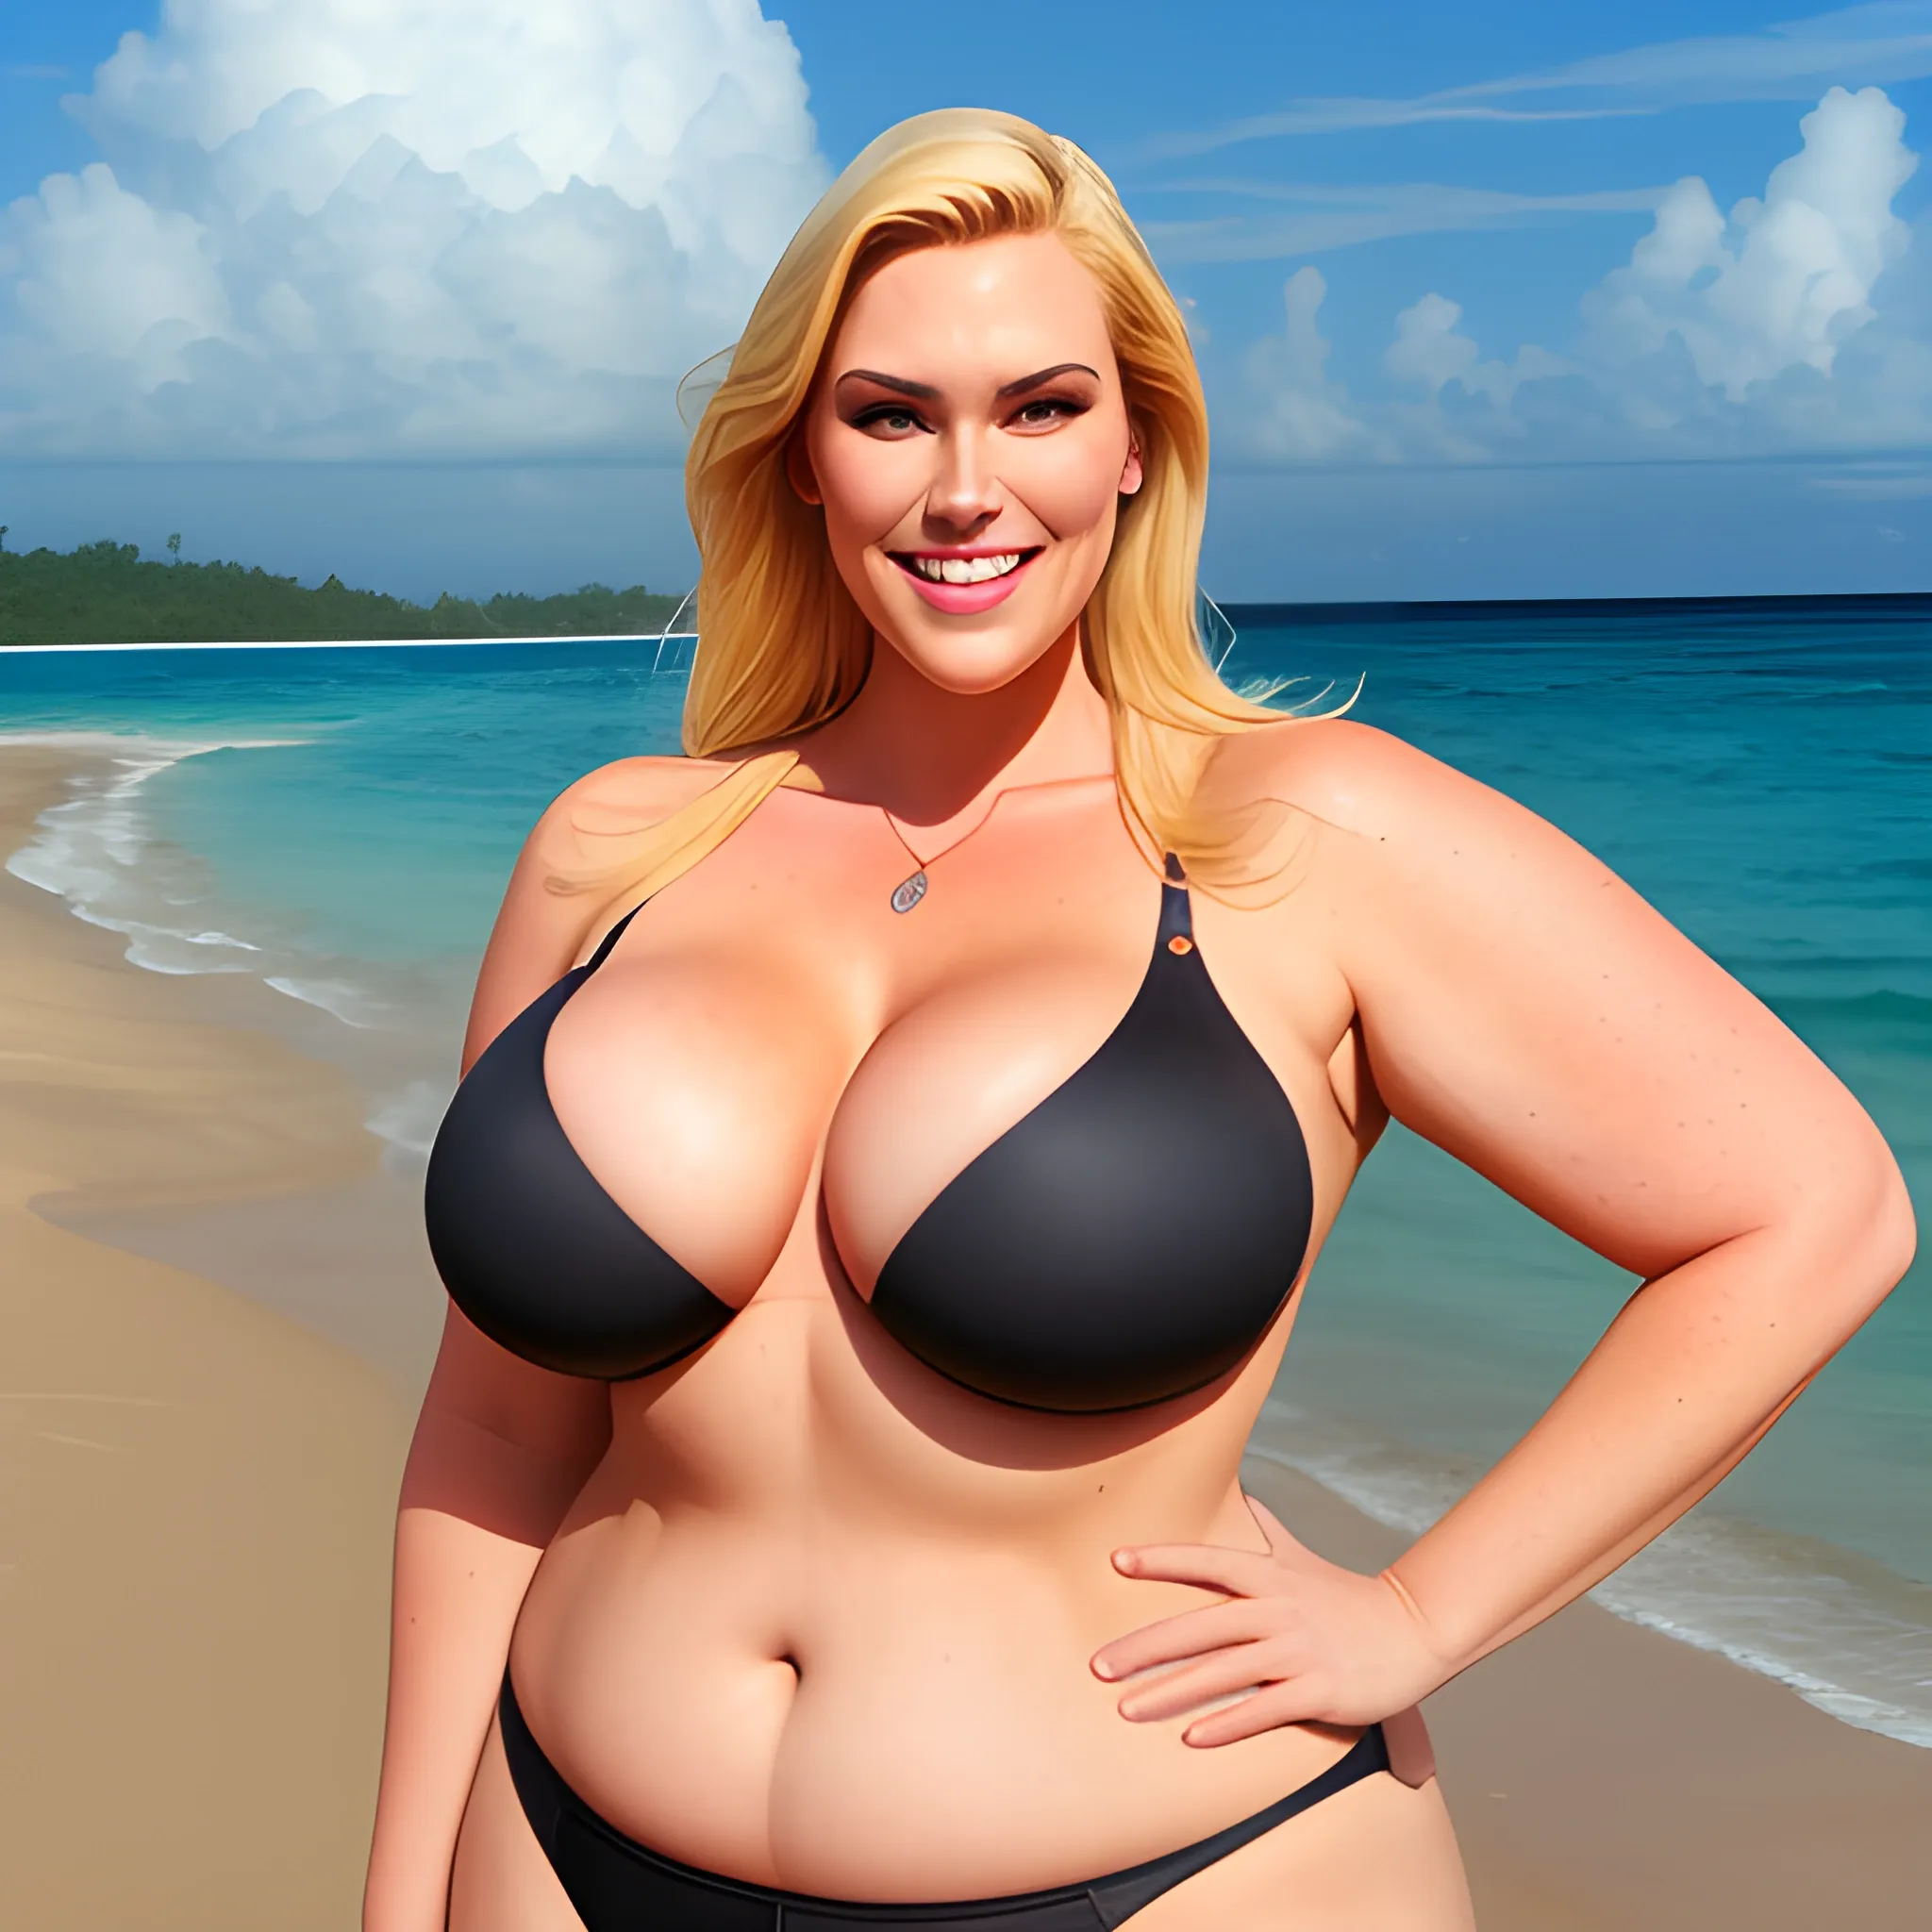 huge tall and strong plus size, not curvy, blonde young girl wit 